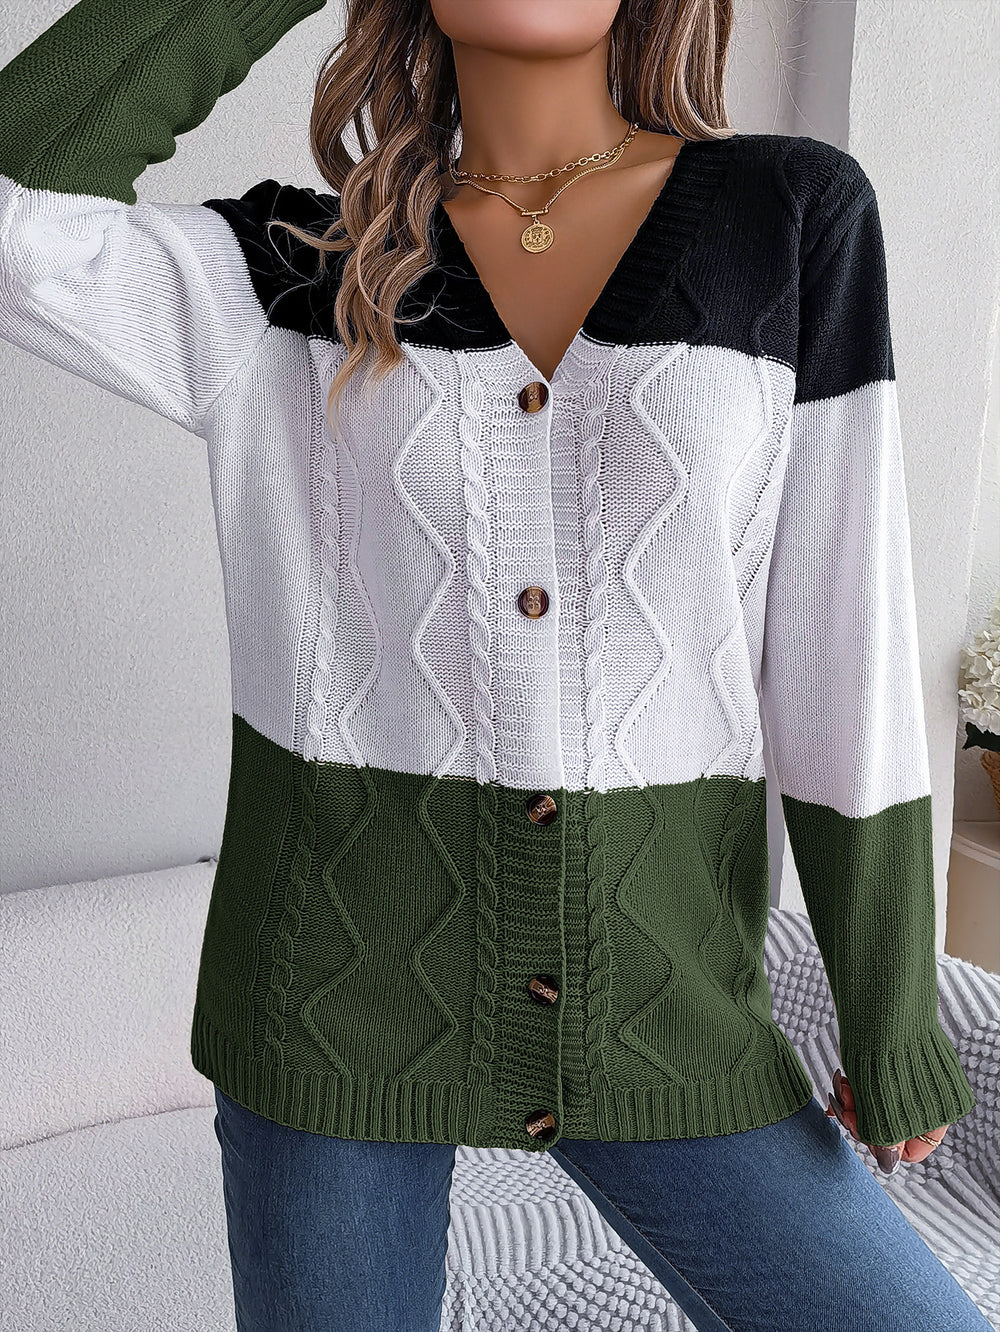 Autumn Winter Casual Contrast Color Button Long Sleeve Sweater Cardigan Coat Women Clothing